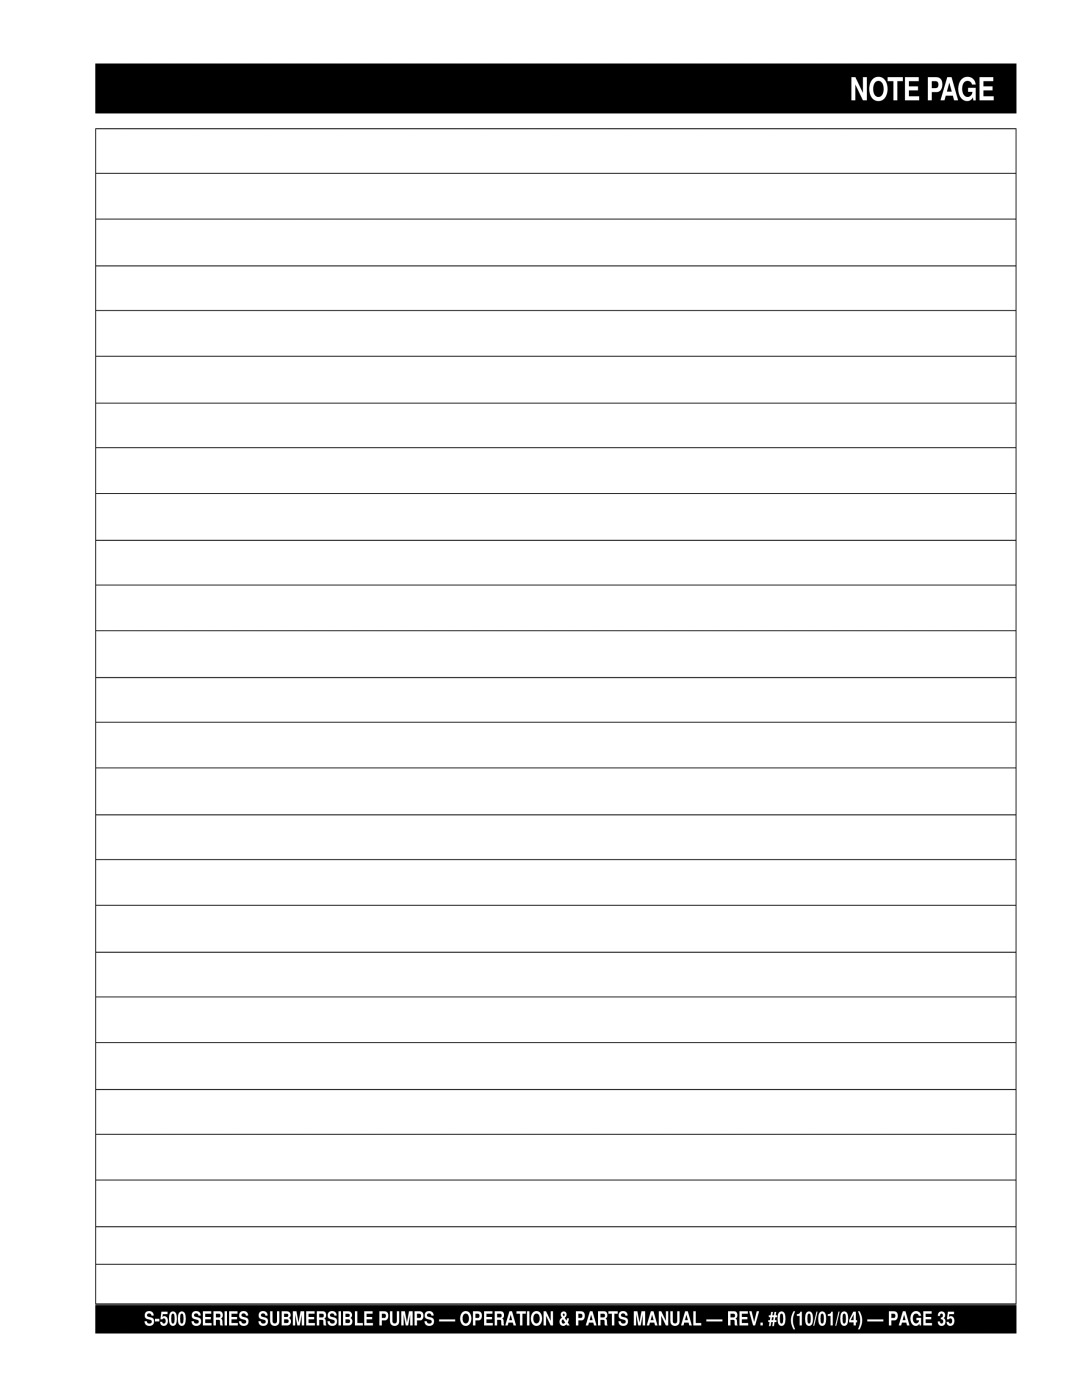 Multiquip S-500 manual Note Page 